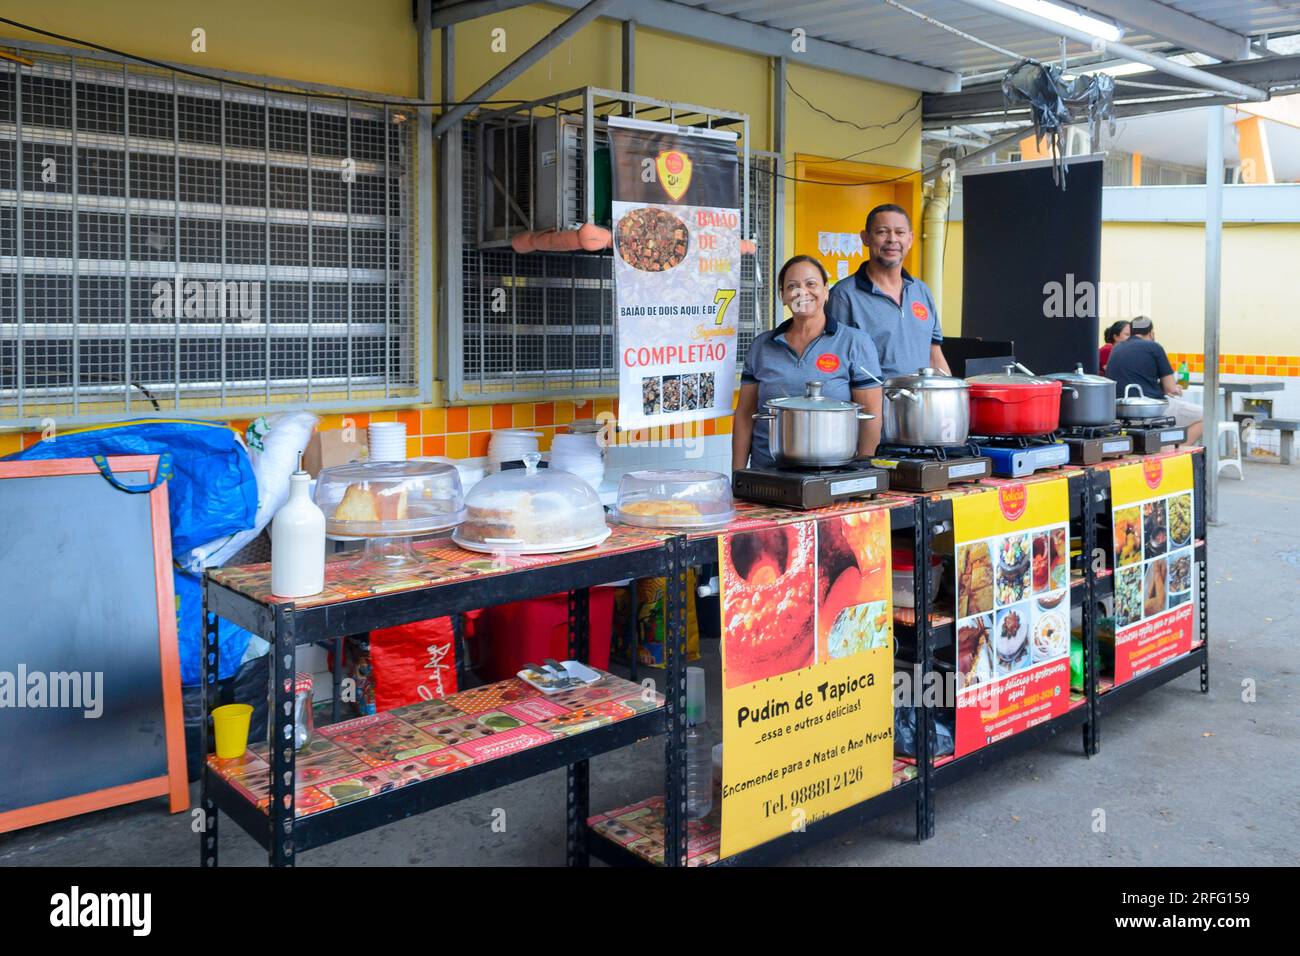 Niteroi, Brazil,  A man and woman work selling homemade food in the exterior areas of a building. Stock Photo